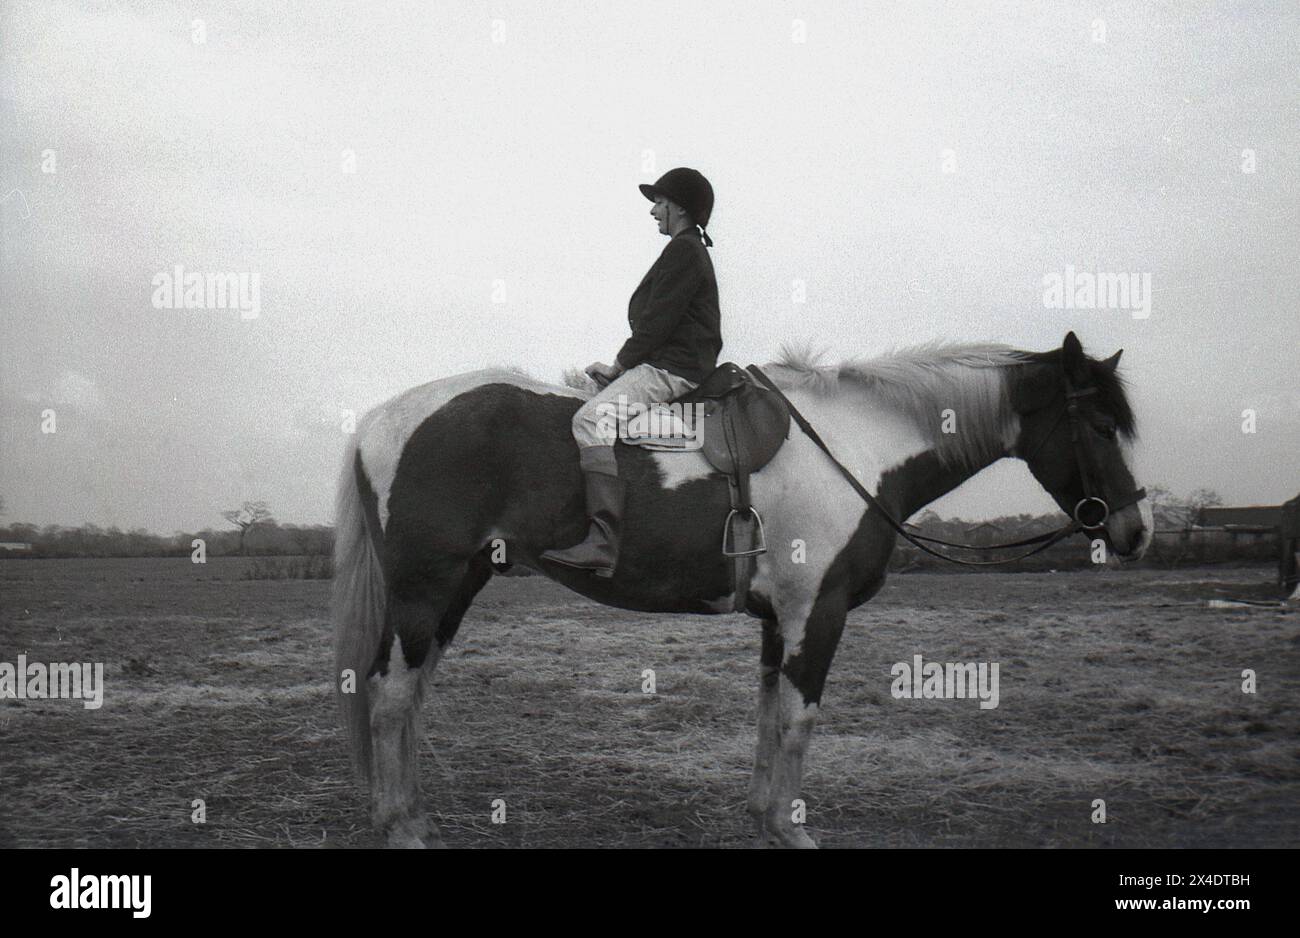 1960s, historical, outside in a field, at a suburban riding school, a girl sitting backwards on a horse, something done to improve her balance when riding. Stock Photo